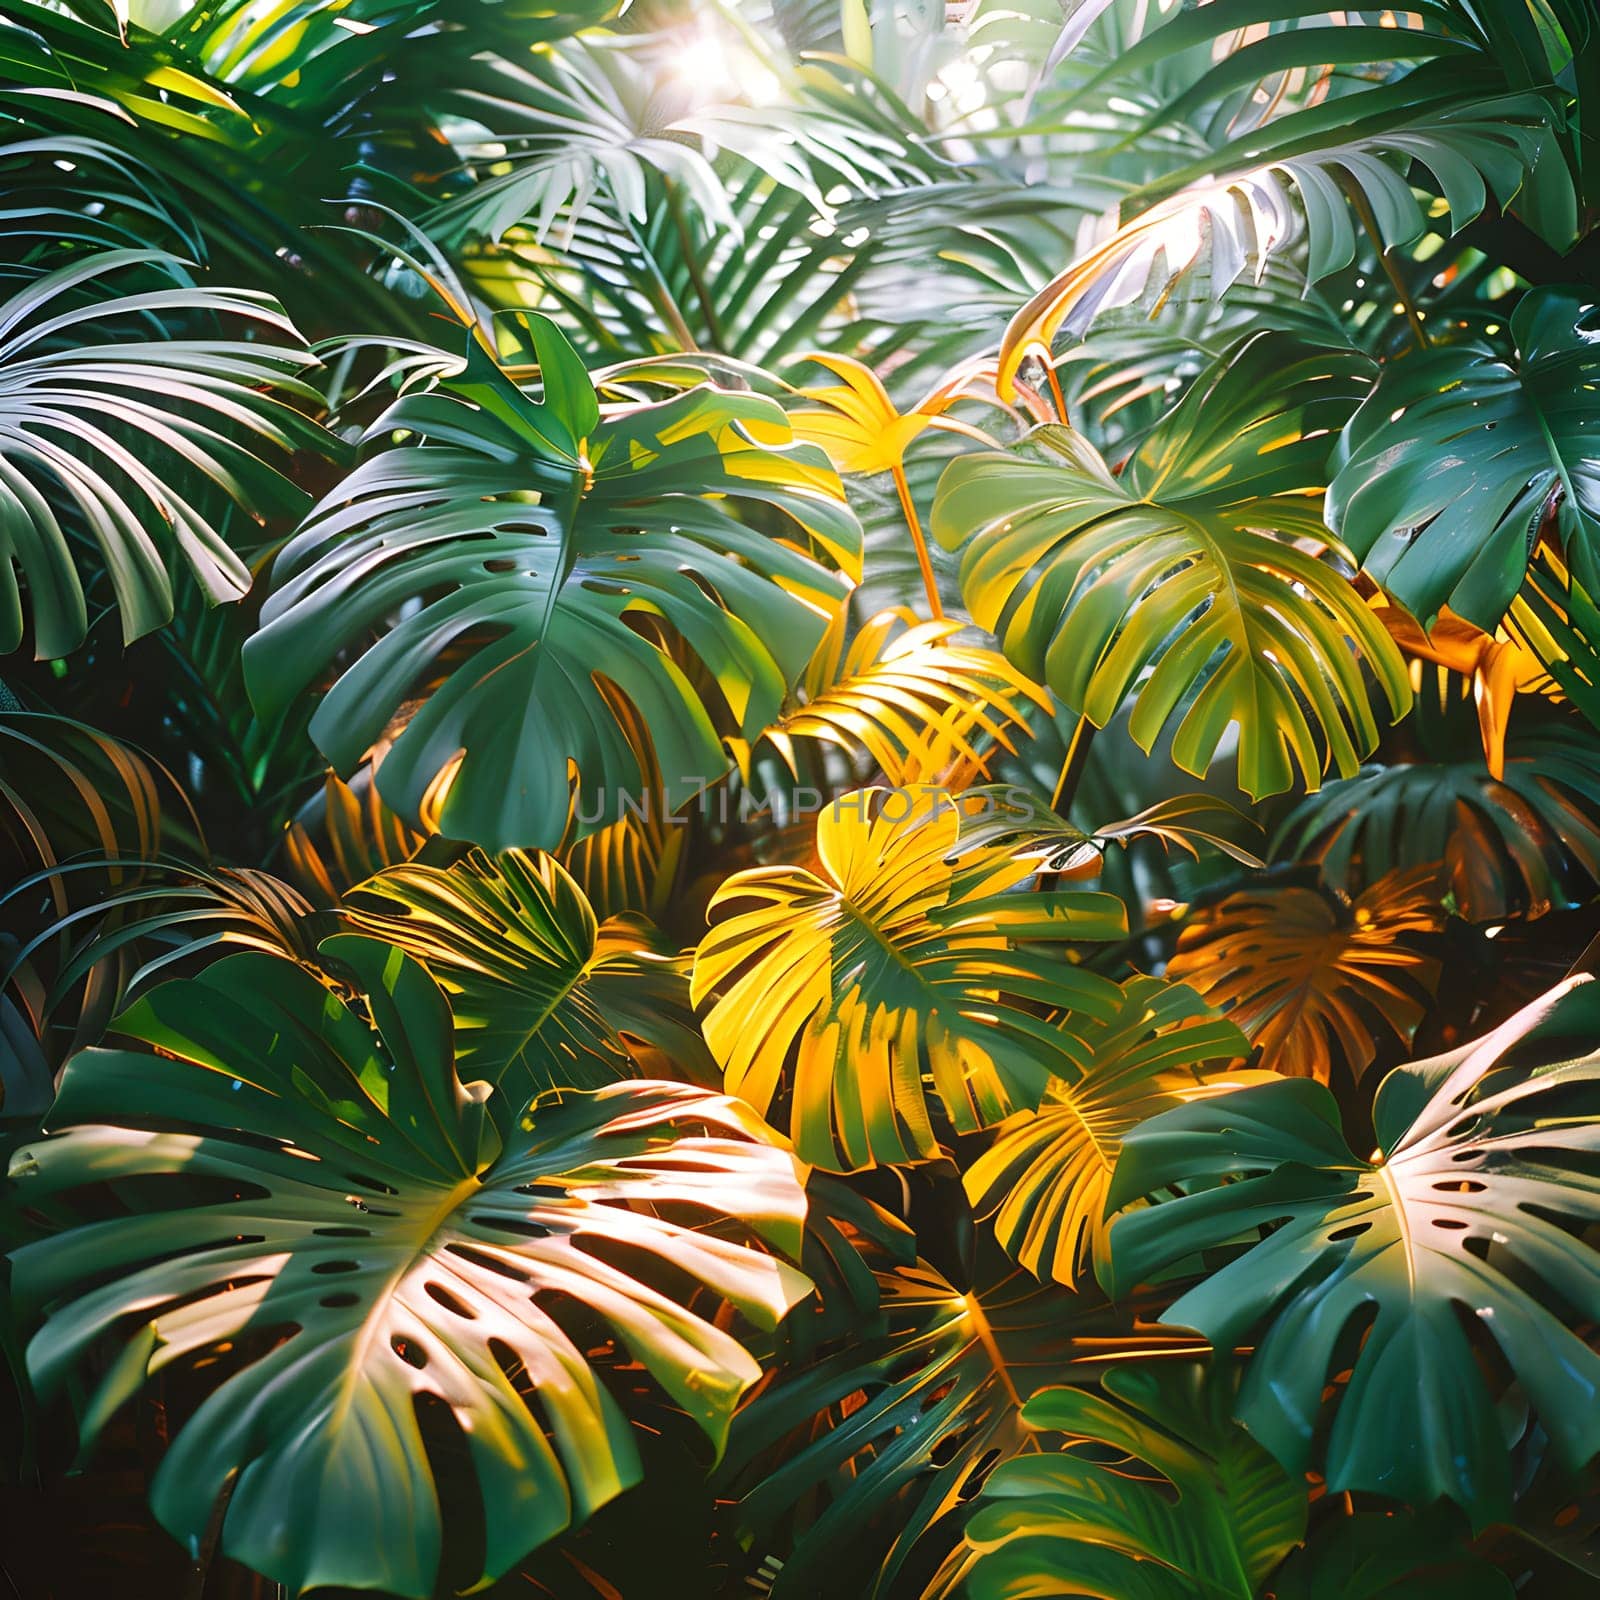 The sunlight filters through the leaves of a tropical plant, illuminating the natural environment and highlighting the vibrant green vegetation